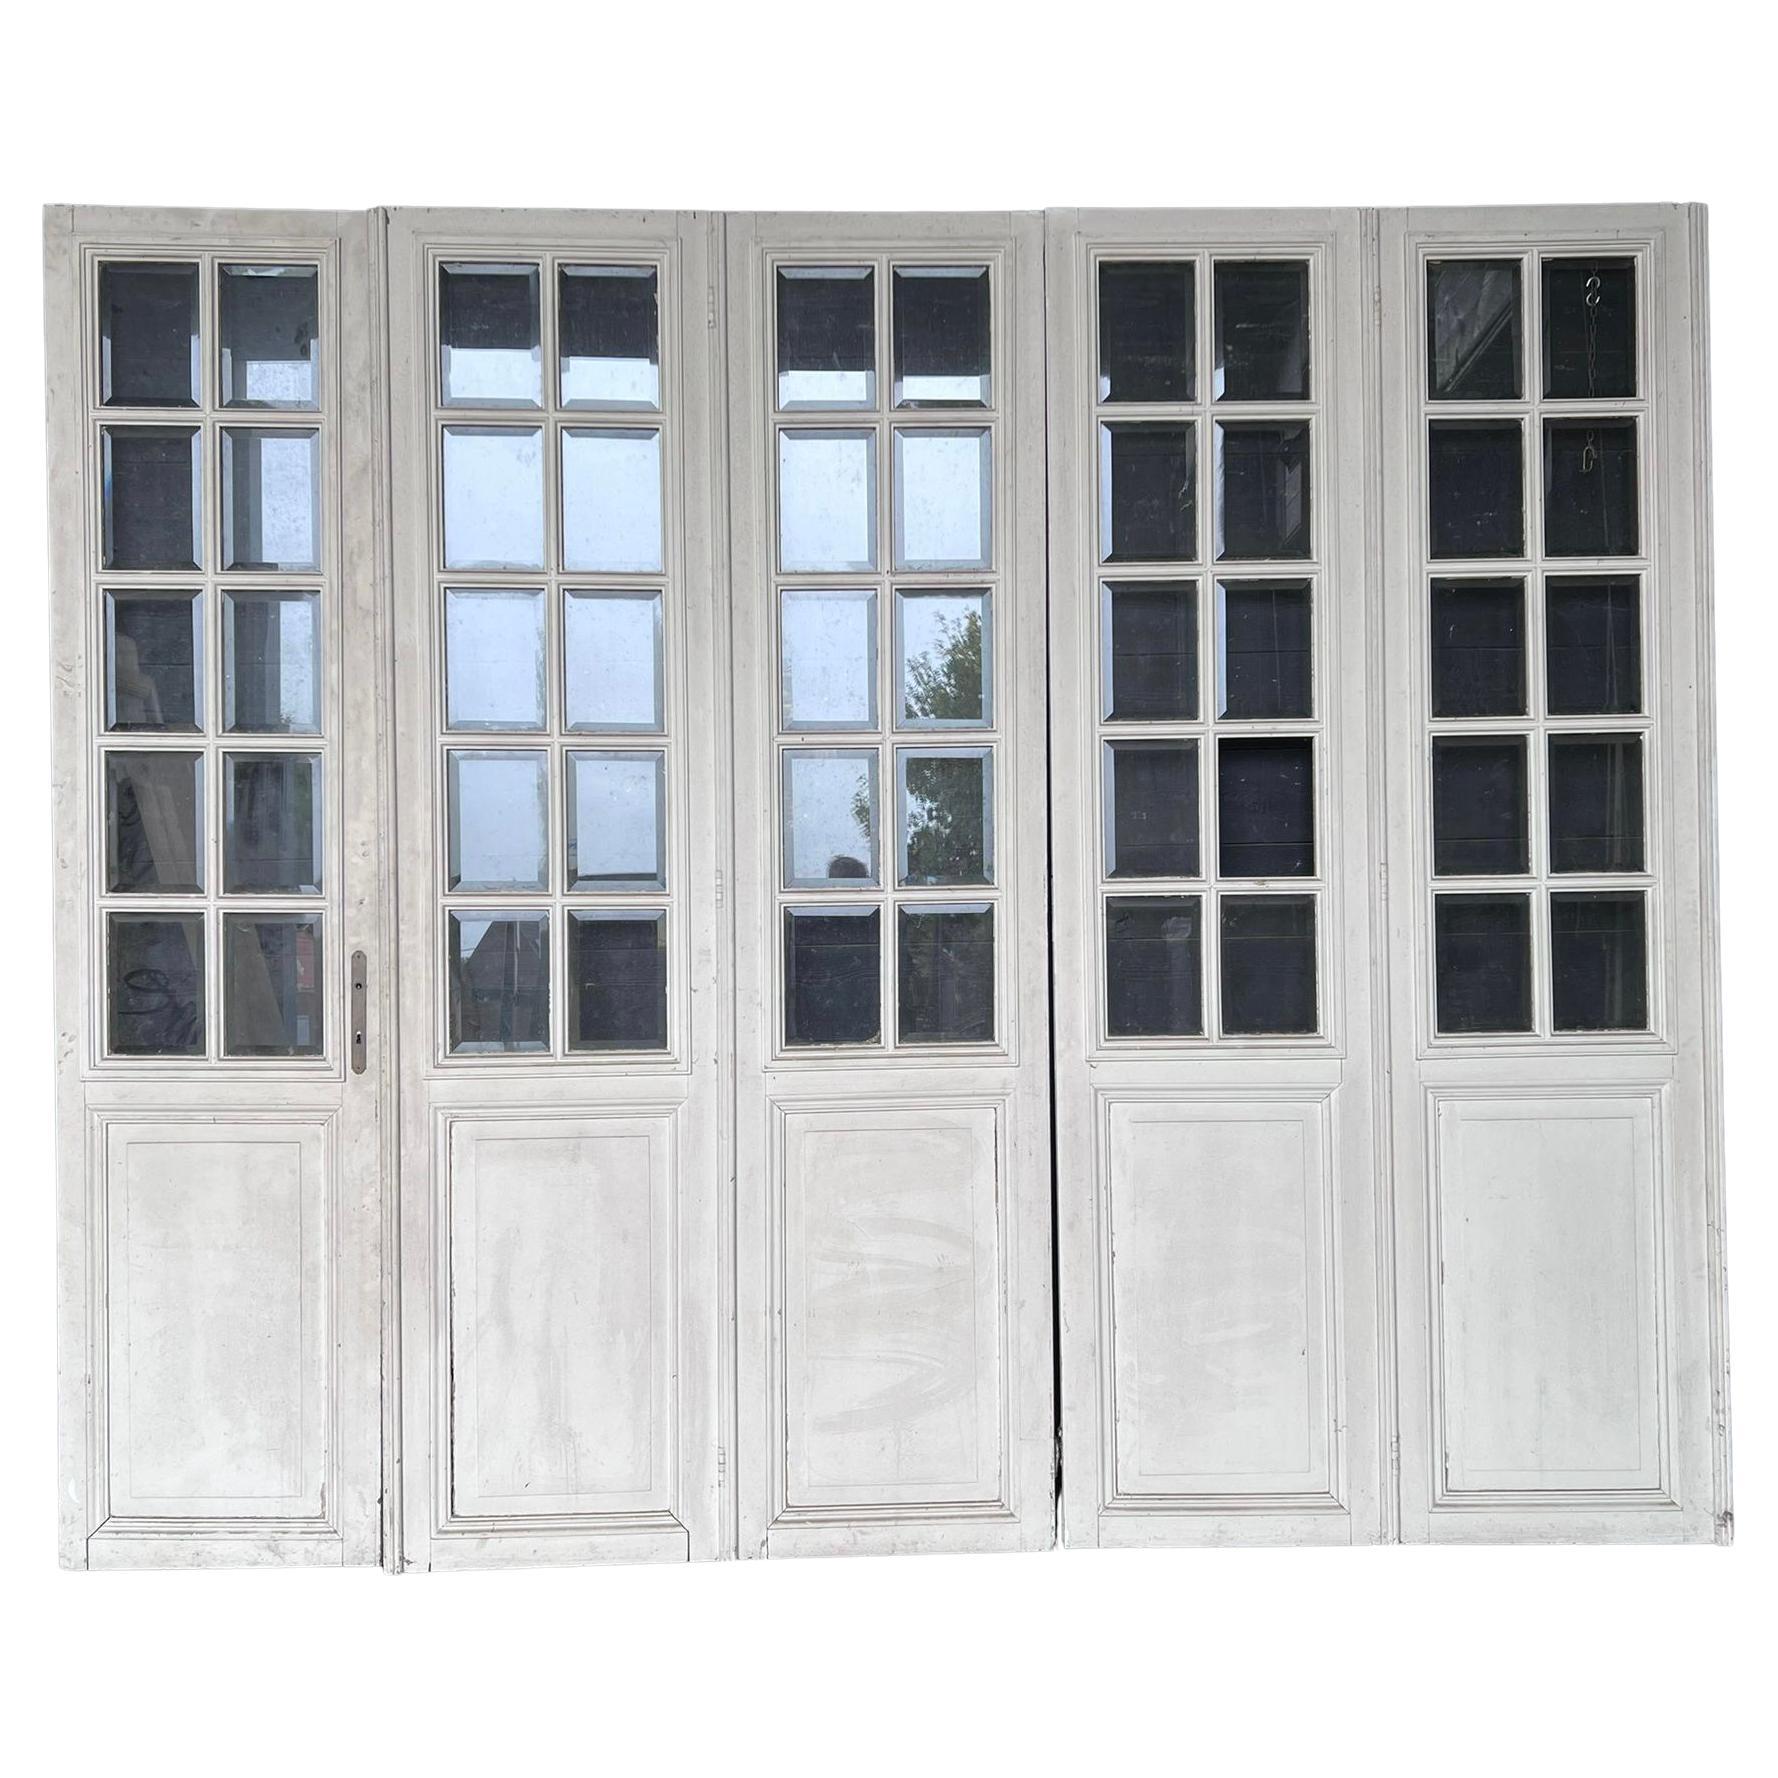 Set 5 French 19th Century Chateau Doors For Sale